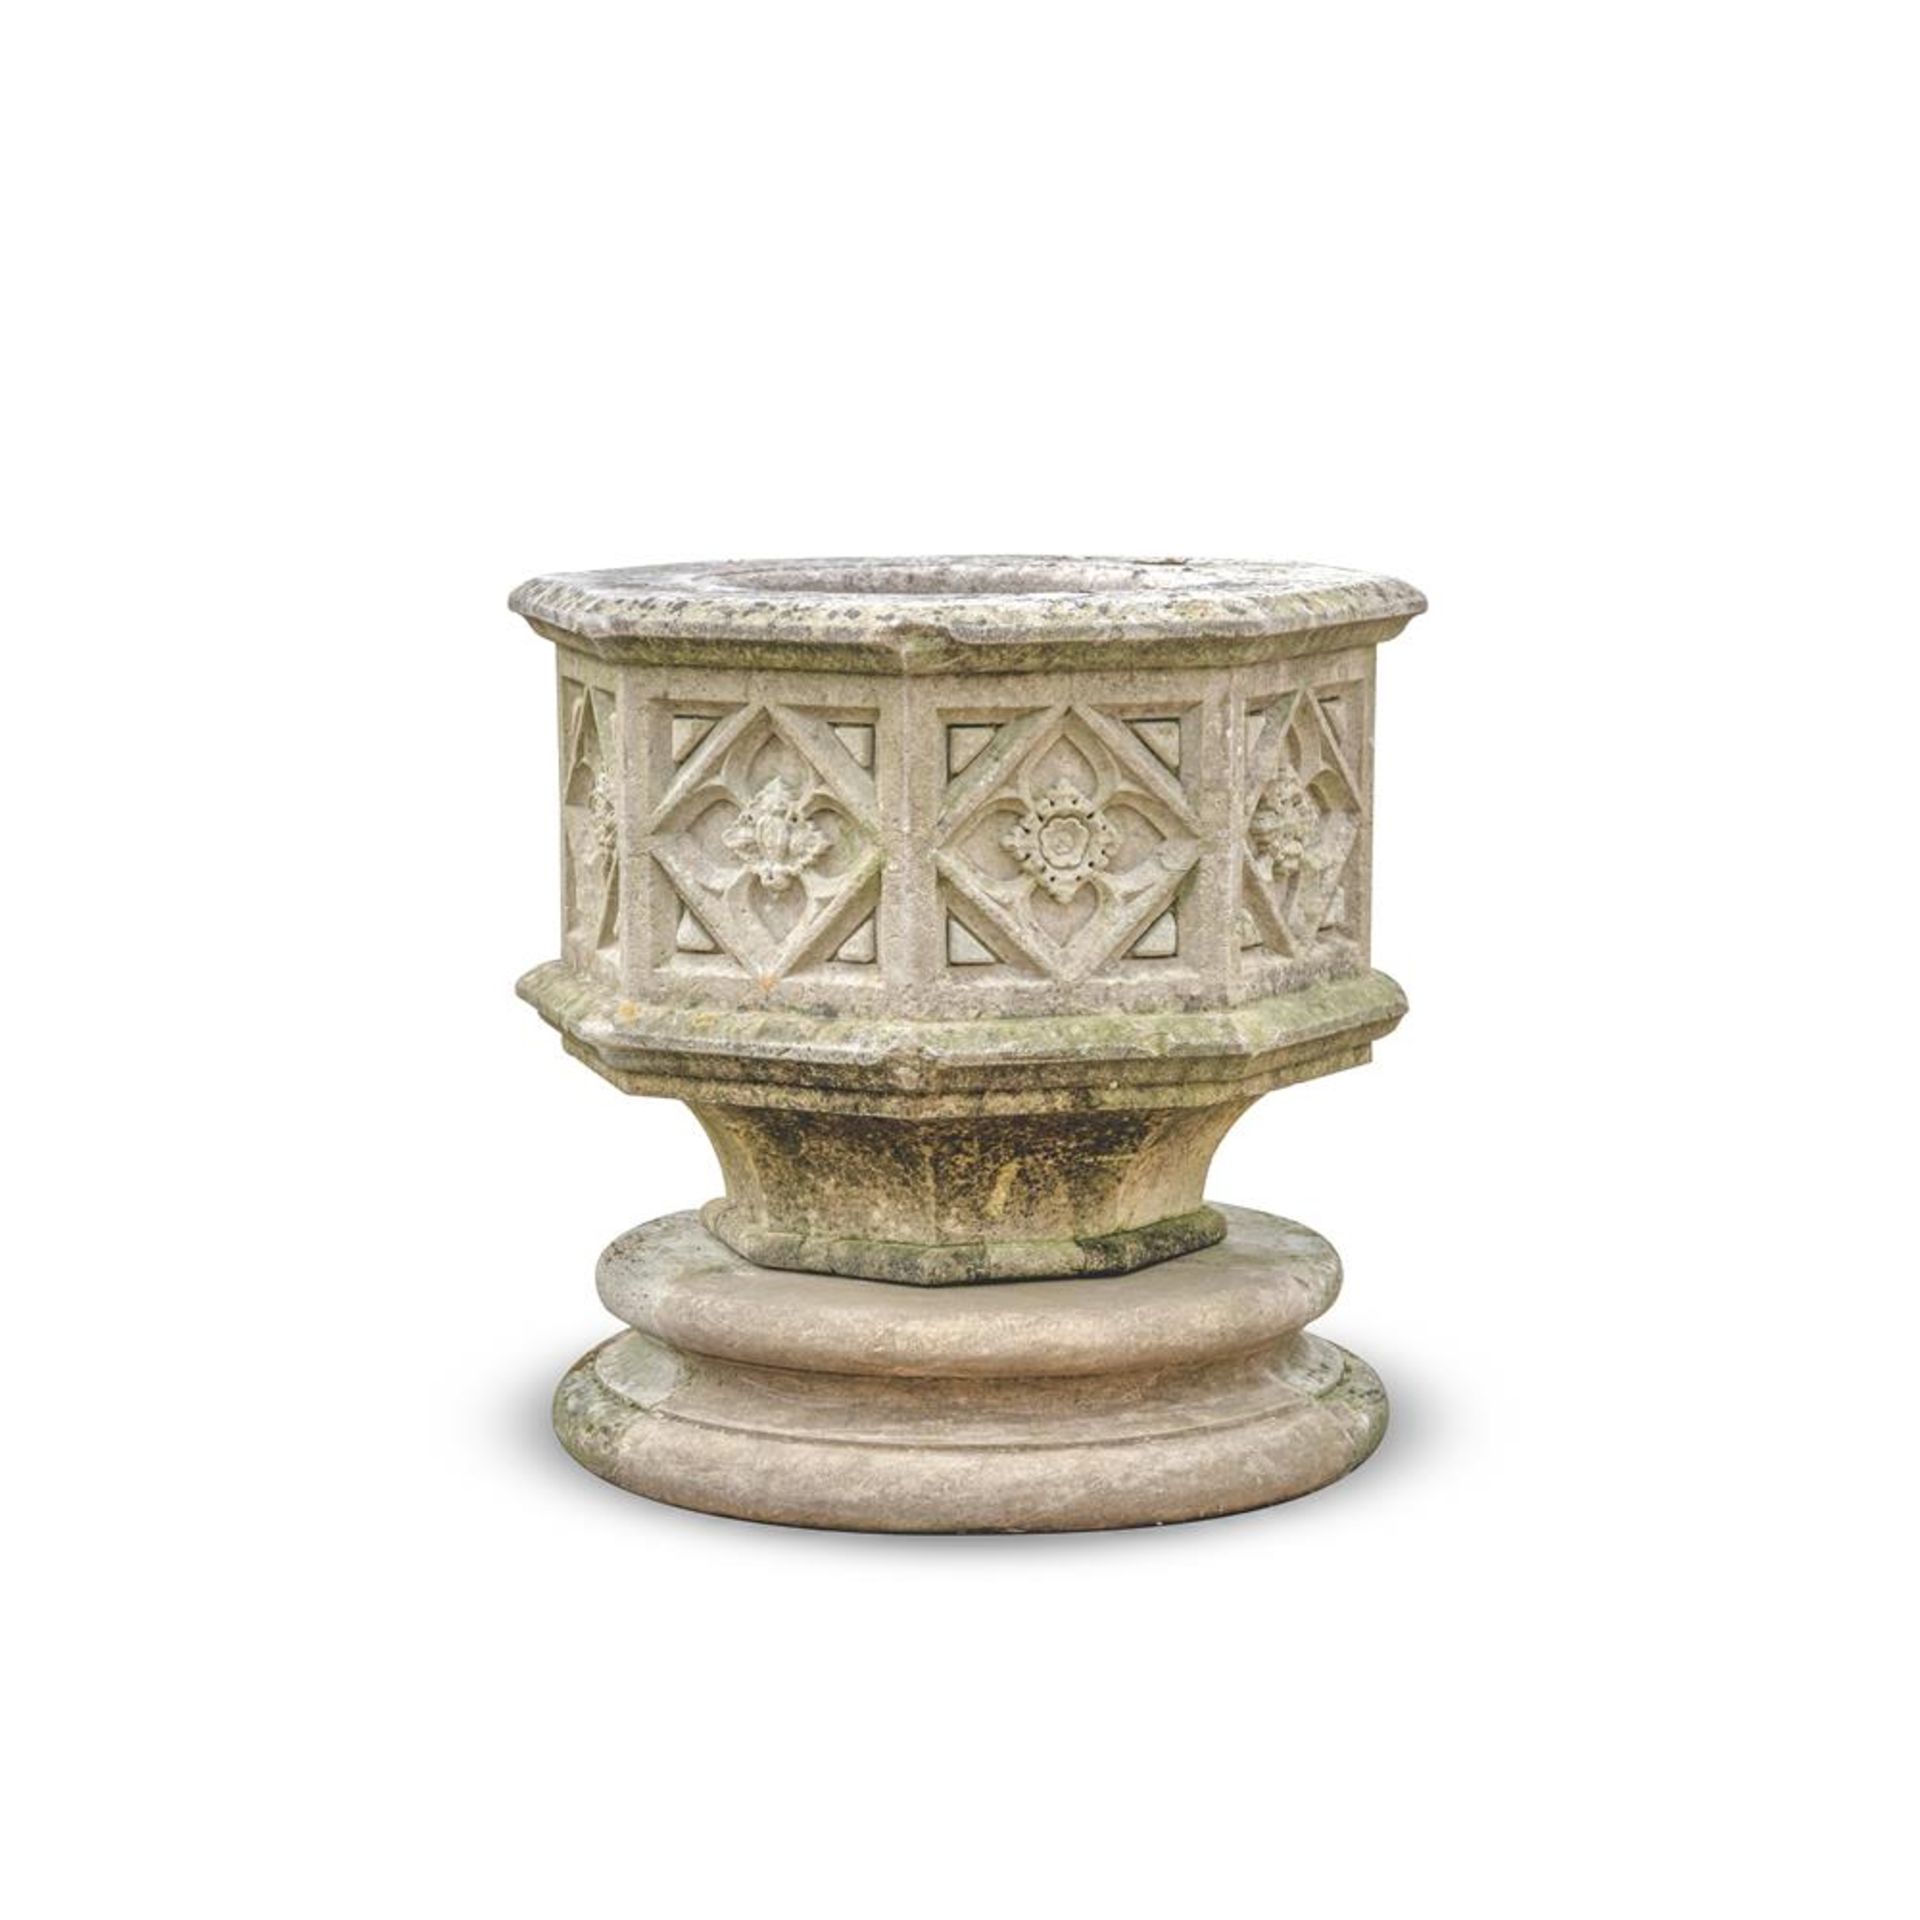 A CARVED STONE GOTHIC PLANTER, LATE 19TH CENTURY